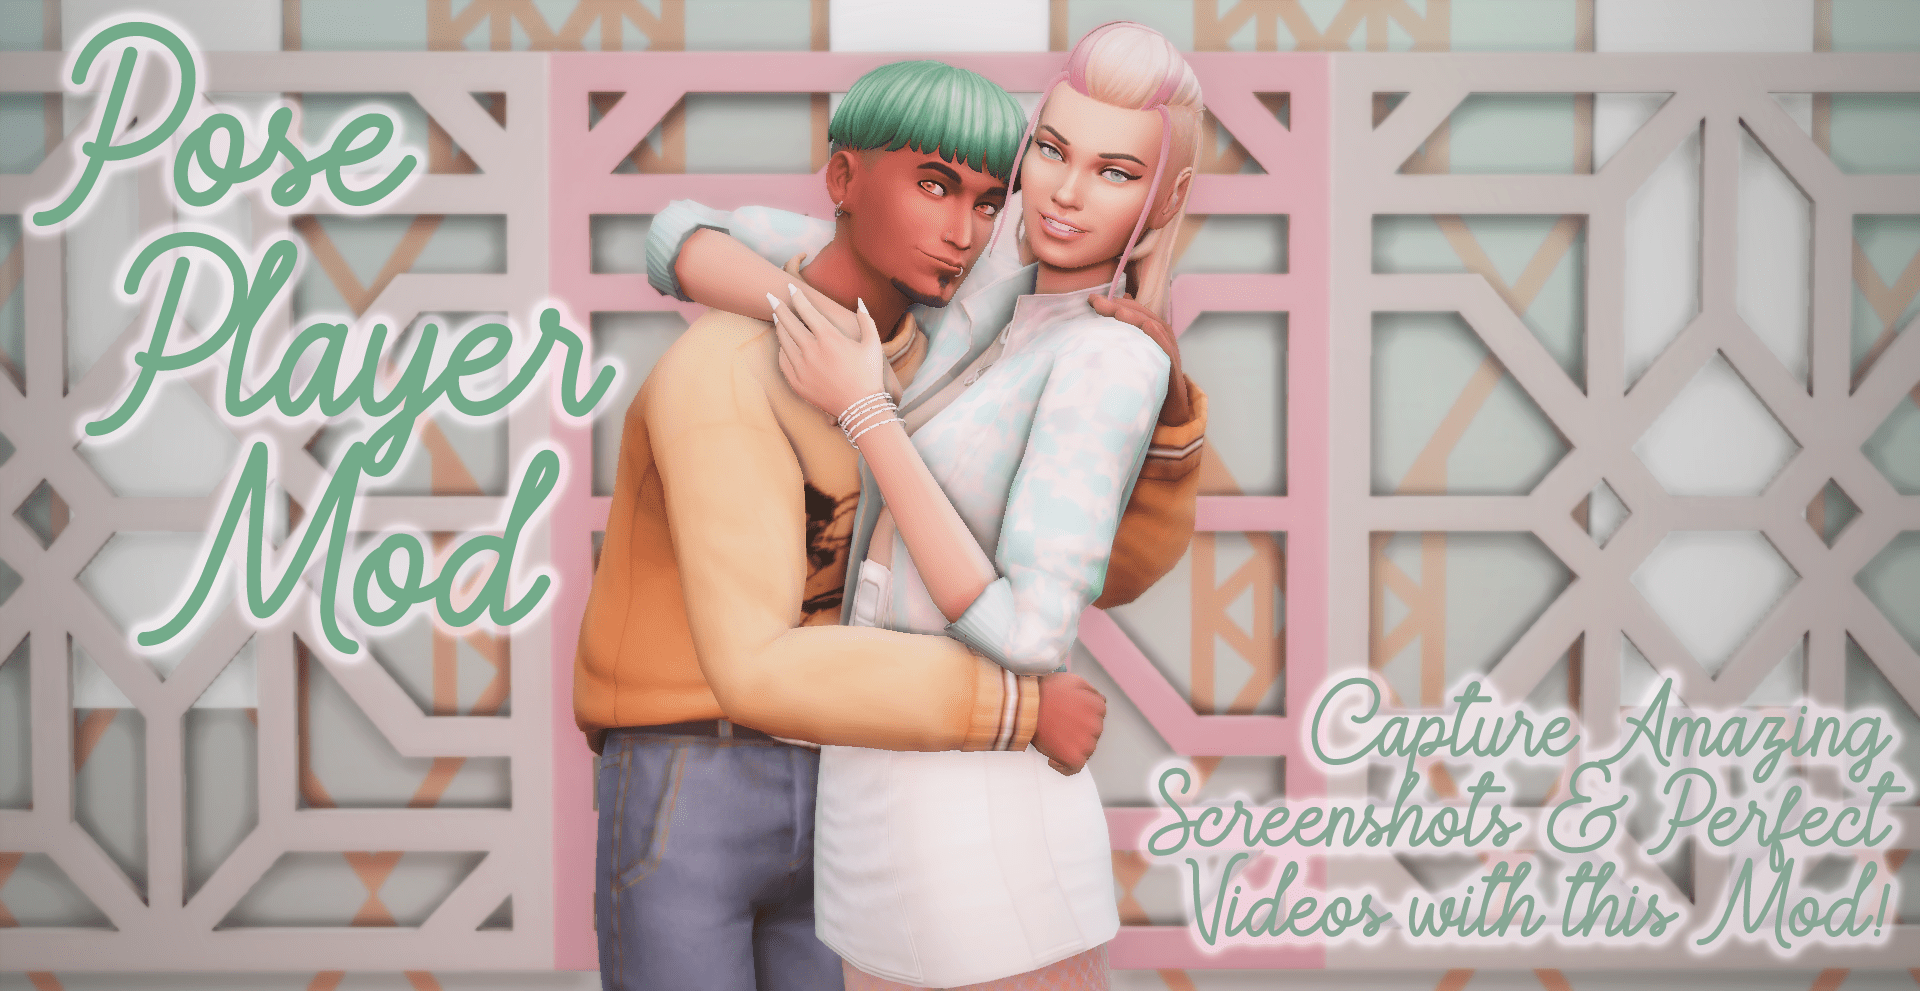 5 minutes set - Telephone, Handset and poses - The Sims 3 Catalog